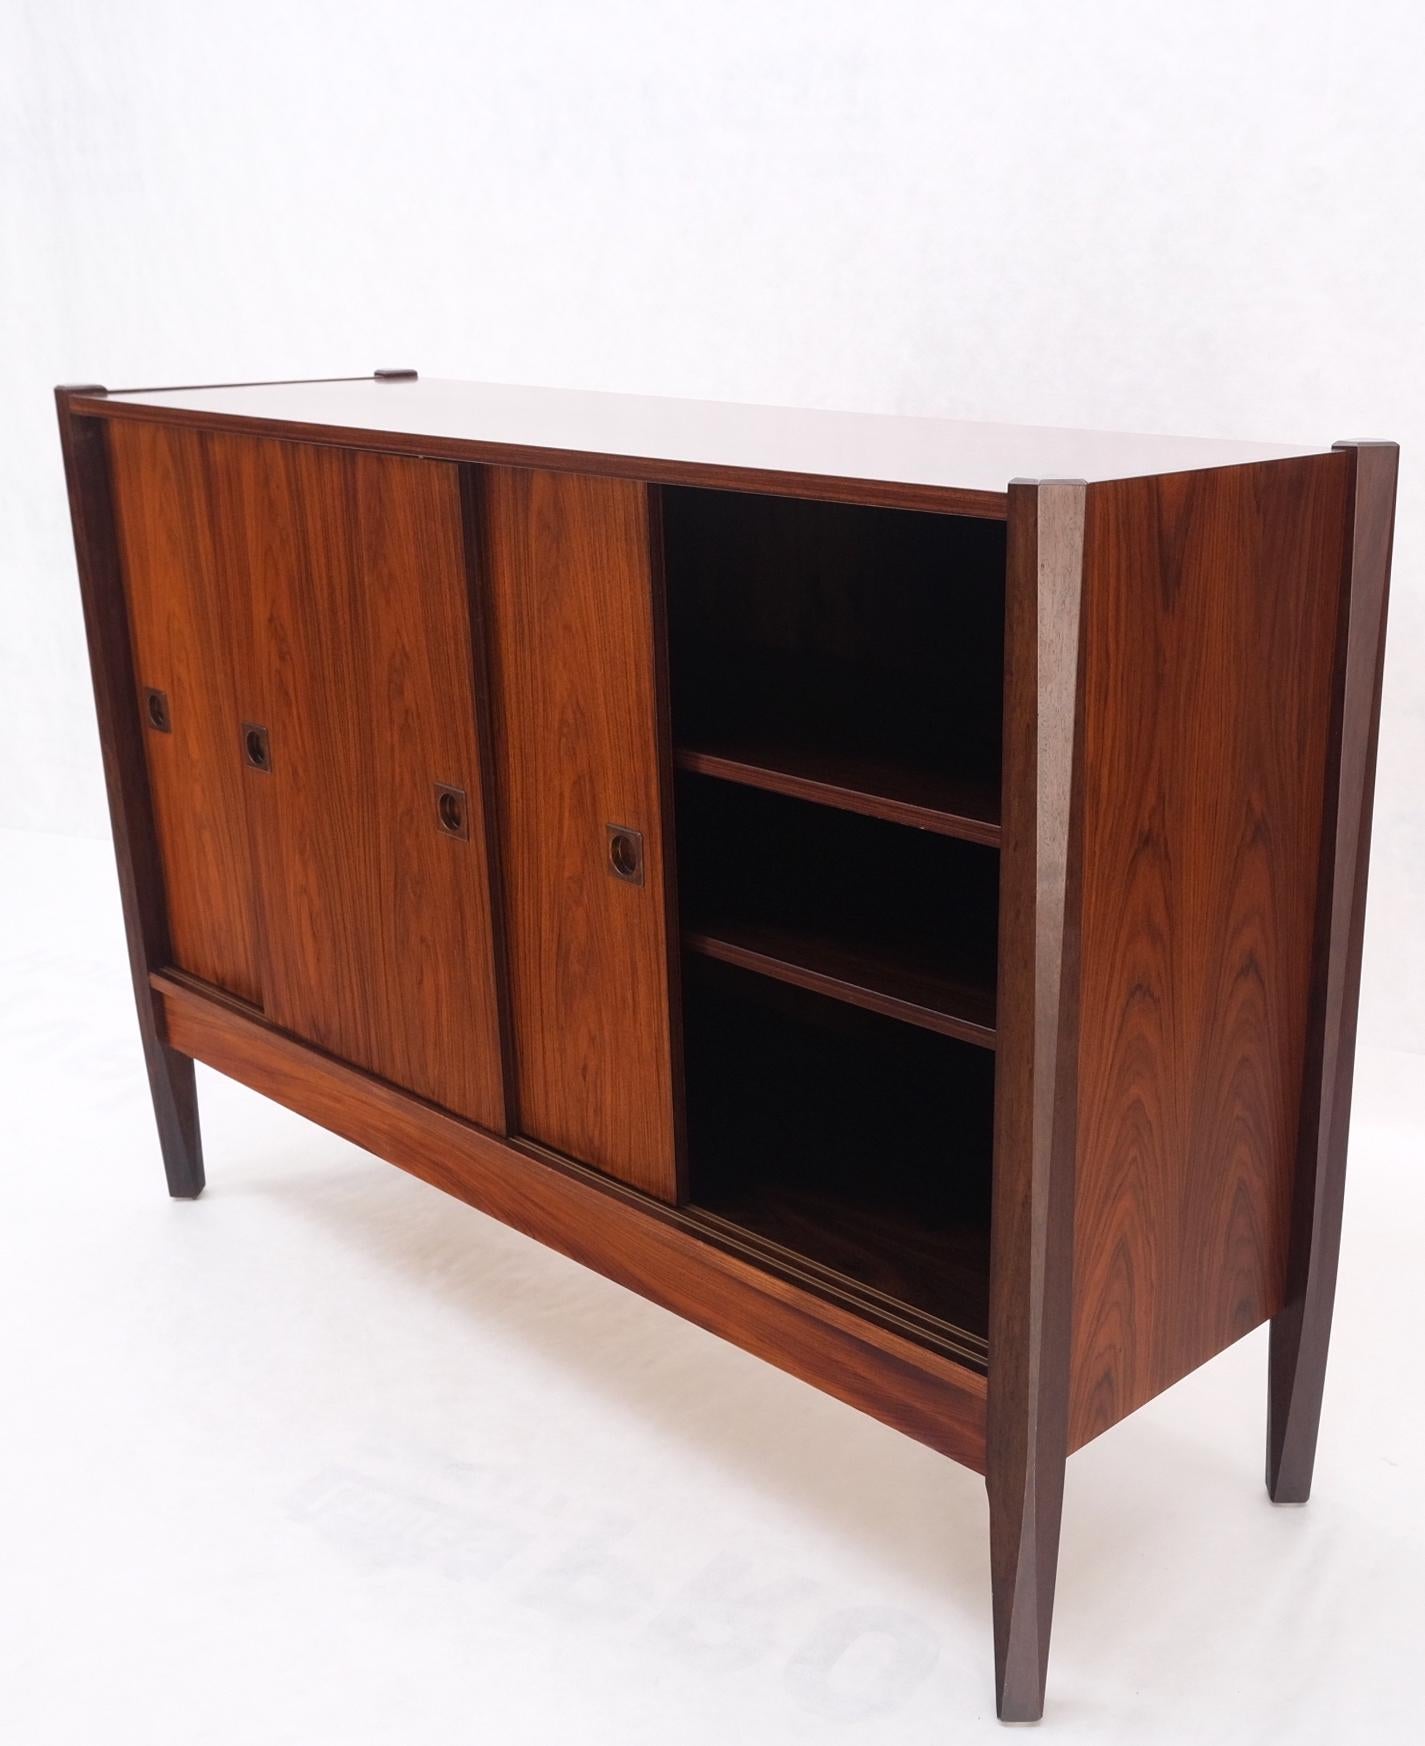 Danish Mid Century Modern Rosewood Compact Tall Credenza Tapered Legs Sliding Doors MINT!